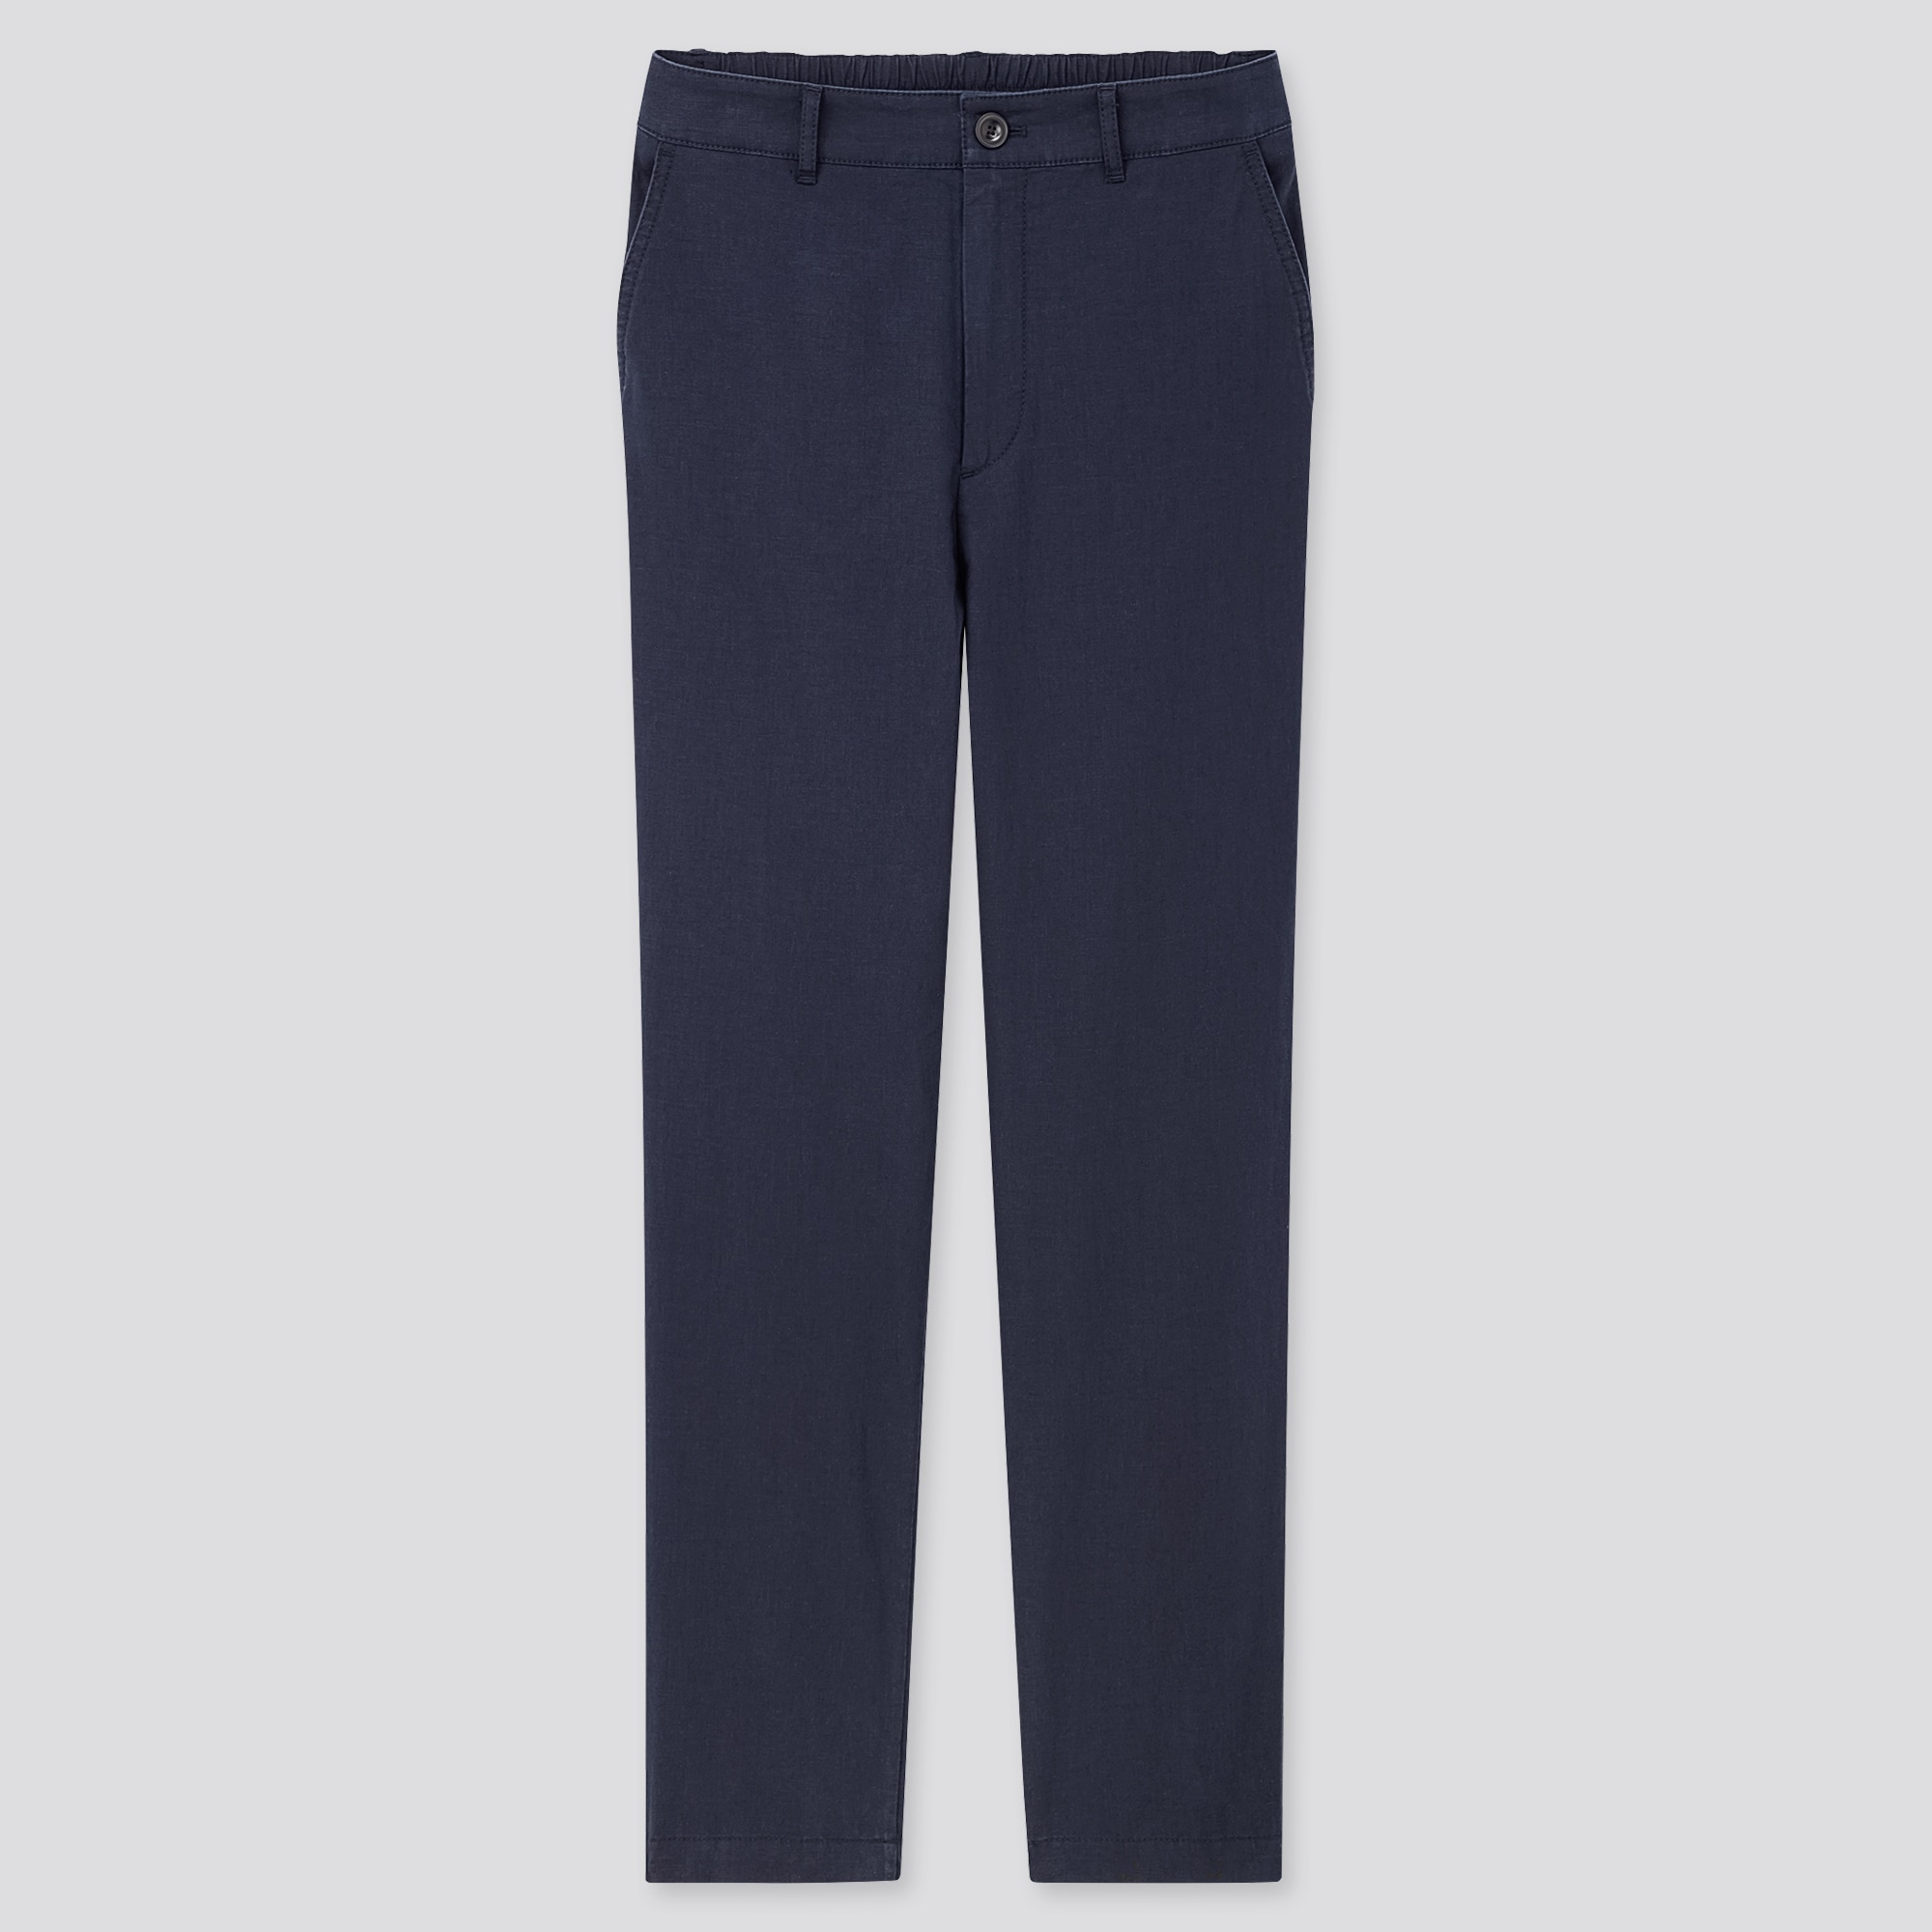 navy tapered pants